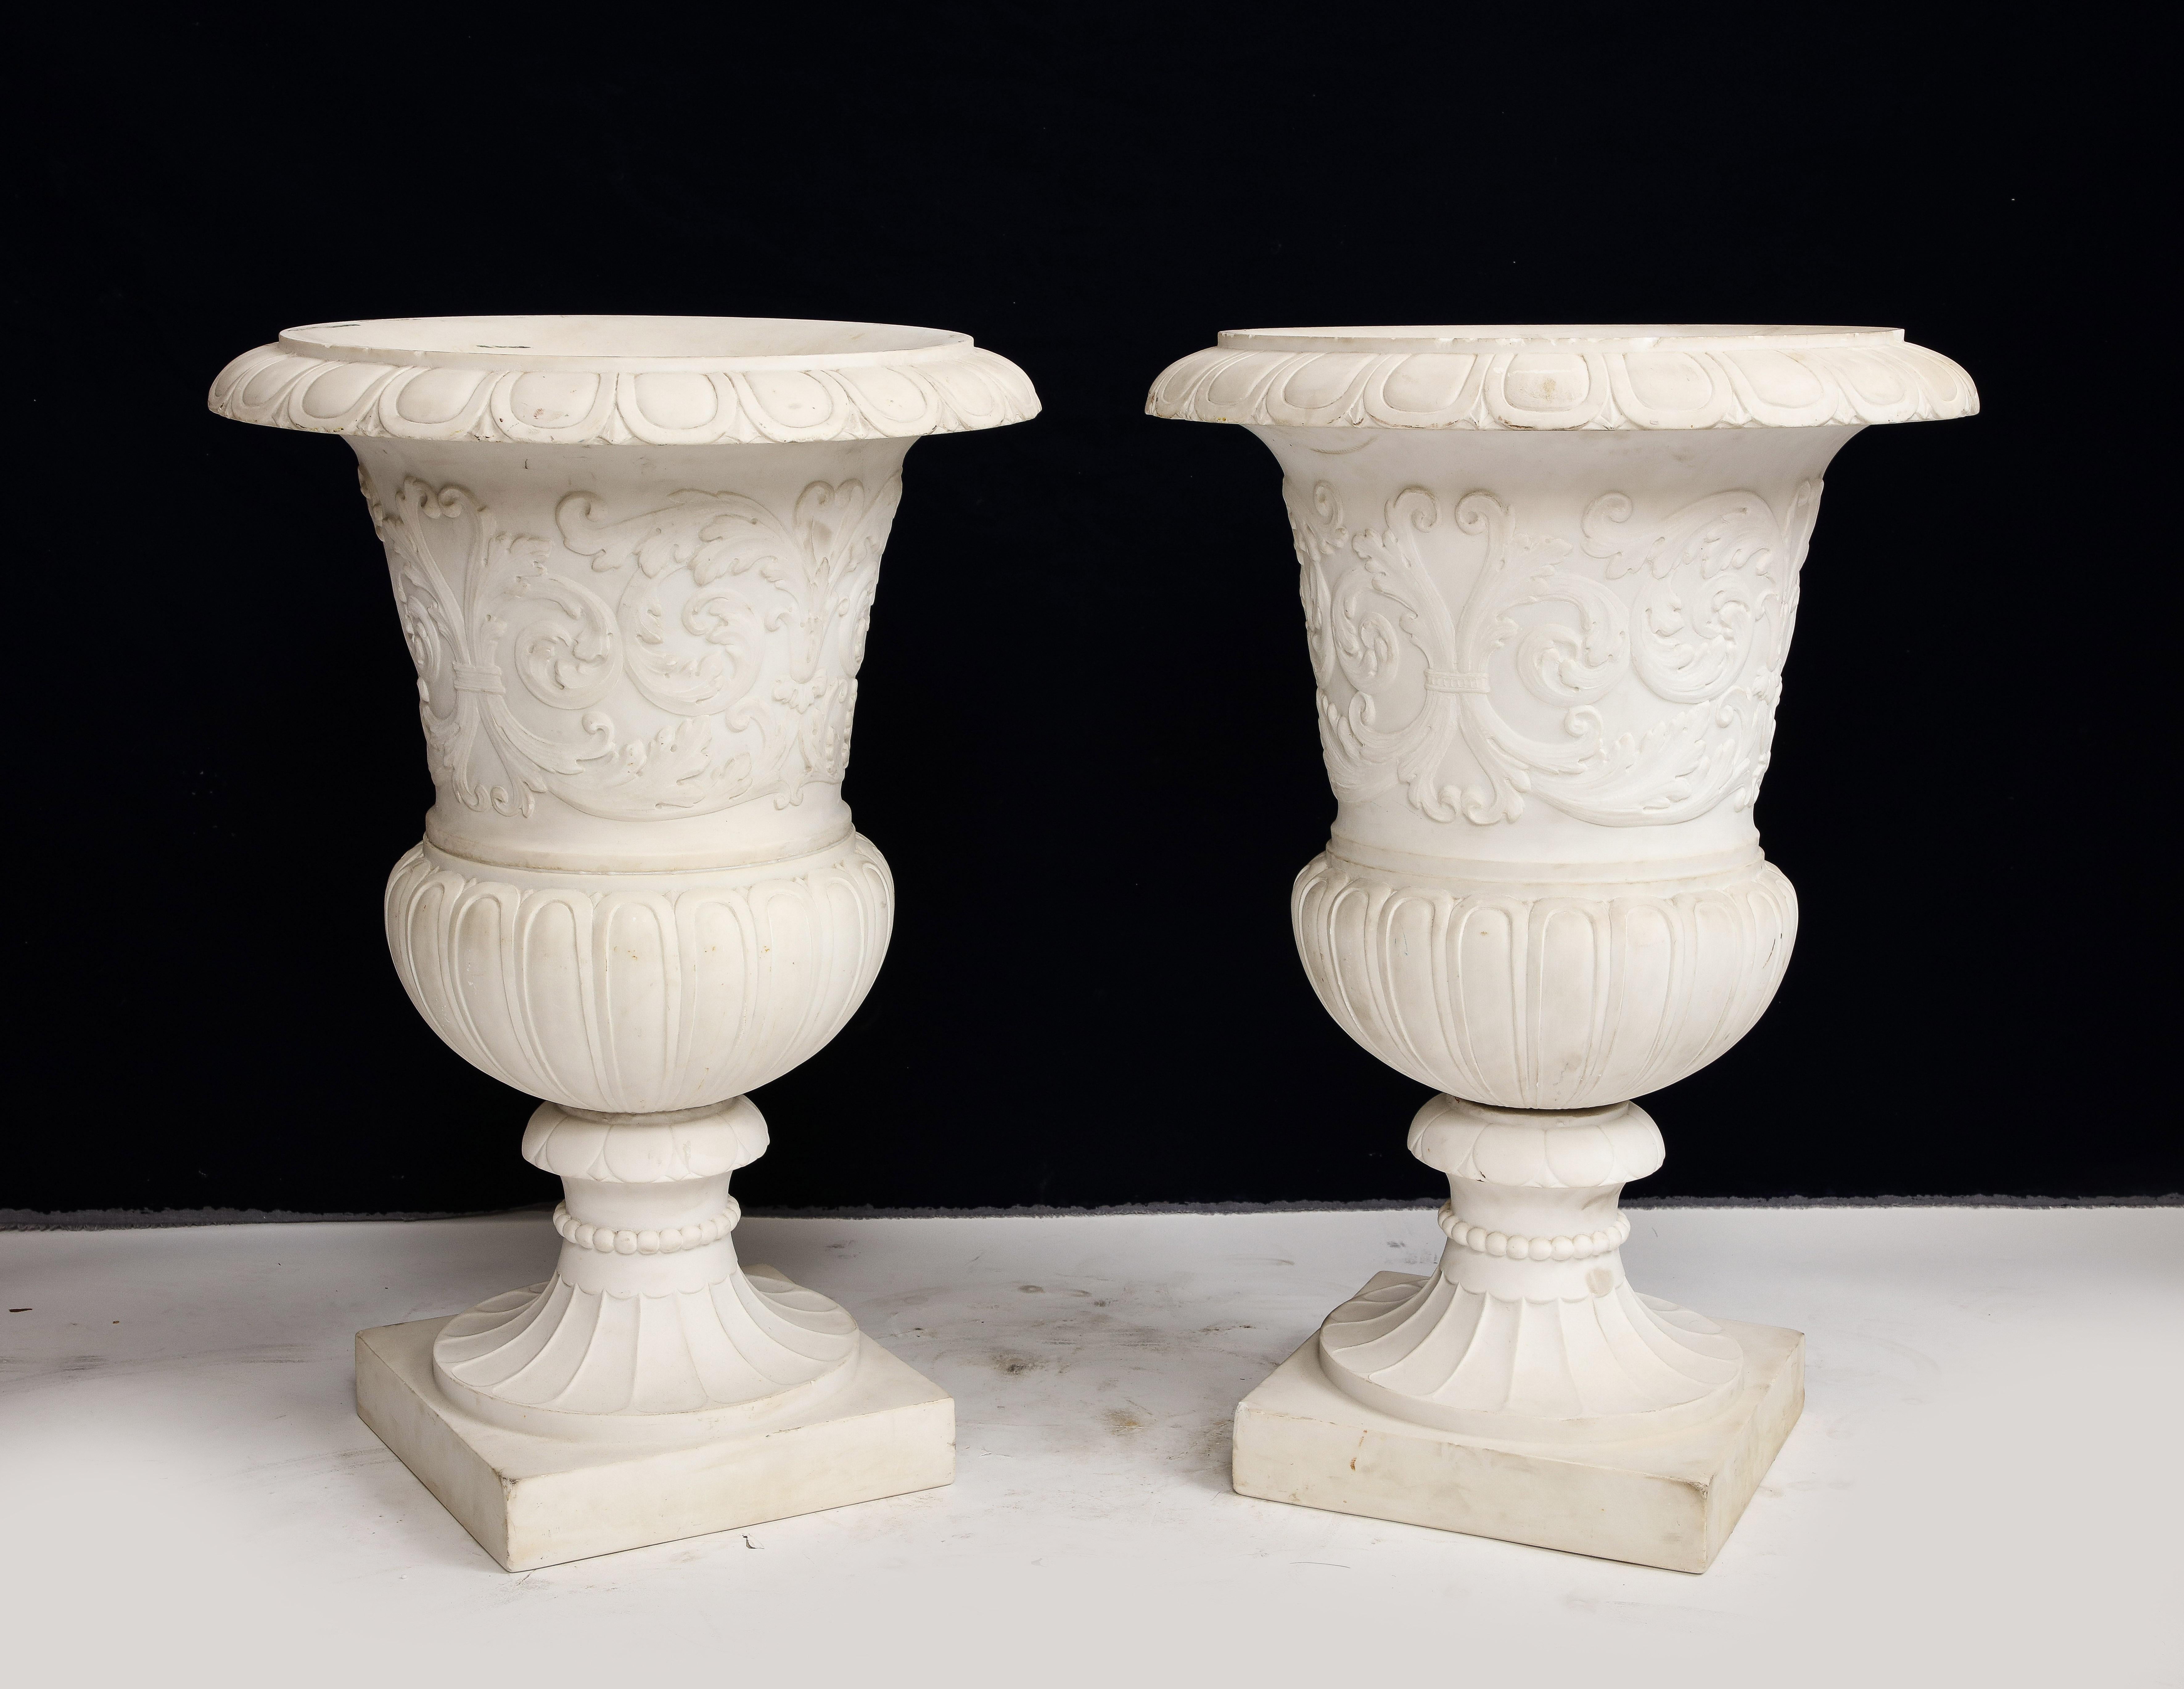 Pair of Italian Carrara Marble Medici Vases w/ Neoclassical Motifs in Relief For Sale 1